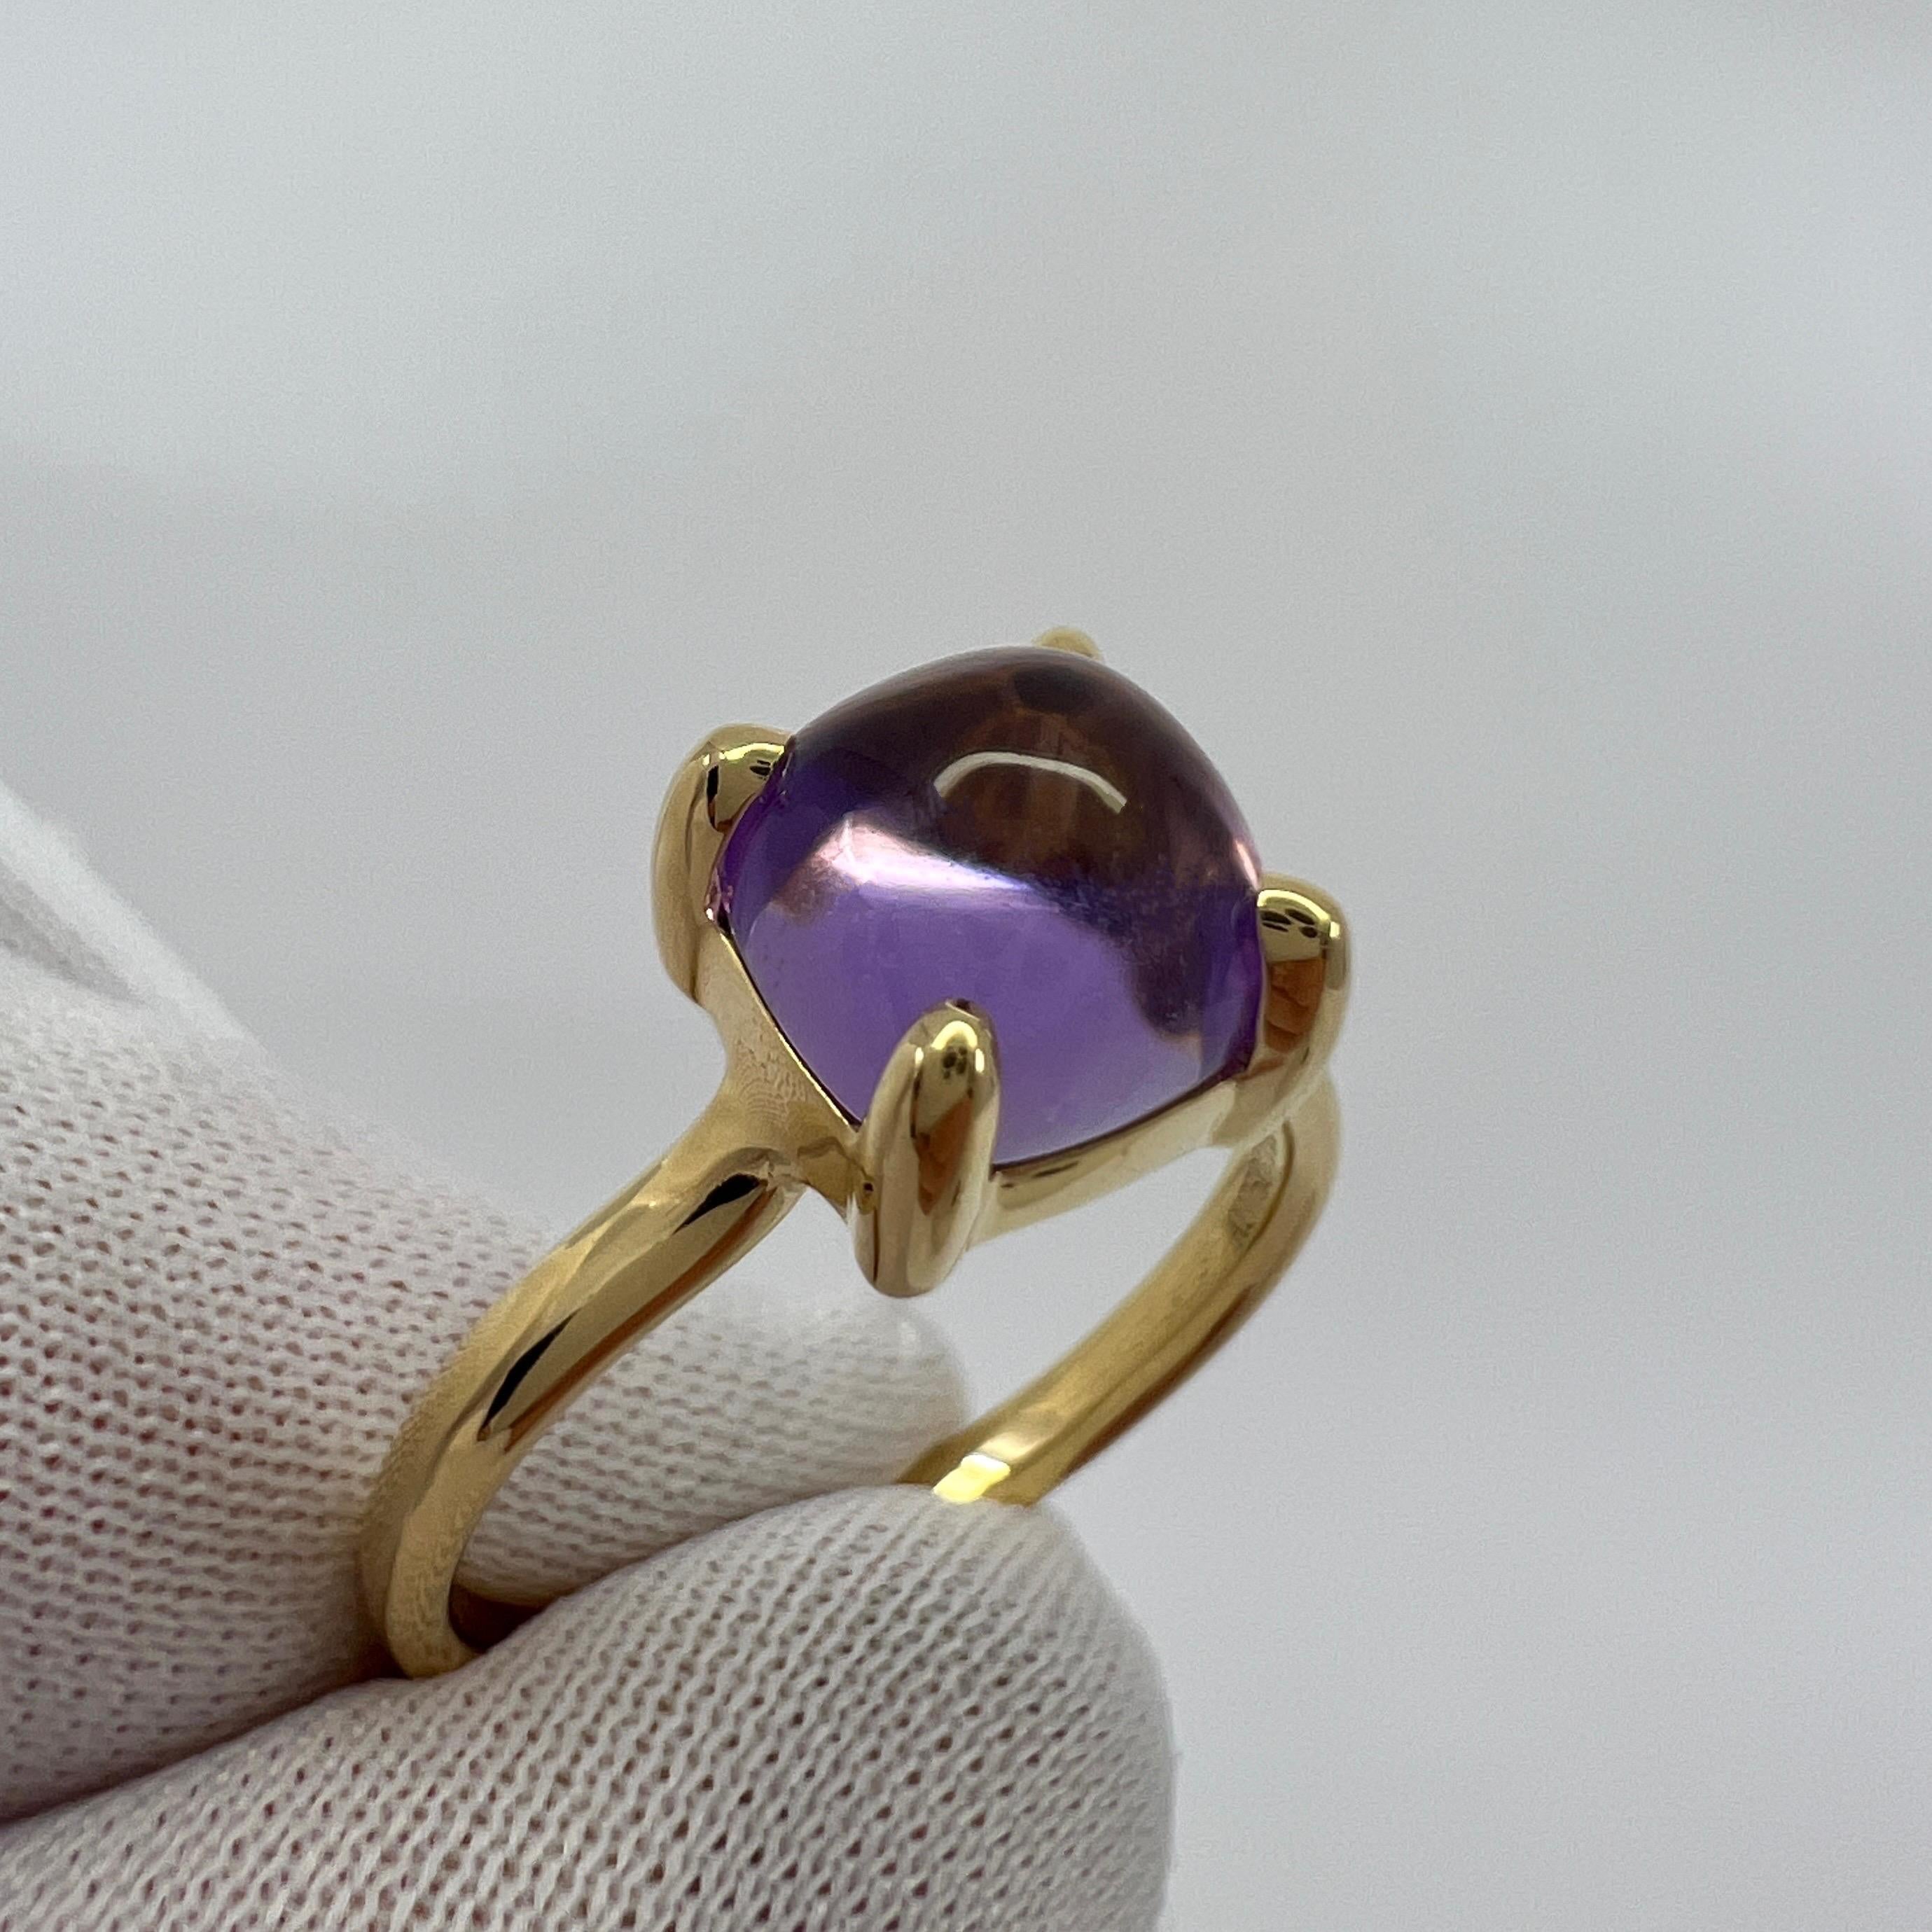 Rare Tiffany & Co. Paloma Picasso Amethyst Sugar Stack Loaf 18k Yellow Gold Ring For Sale 7